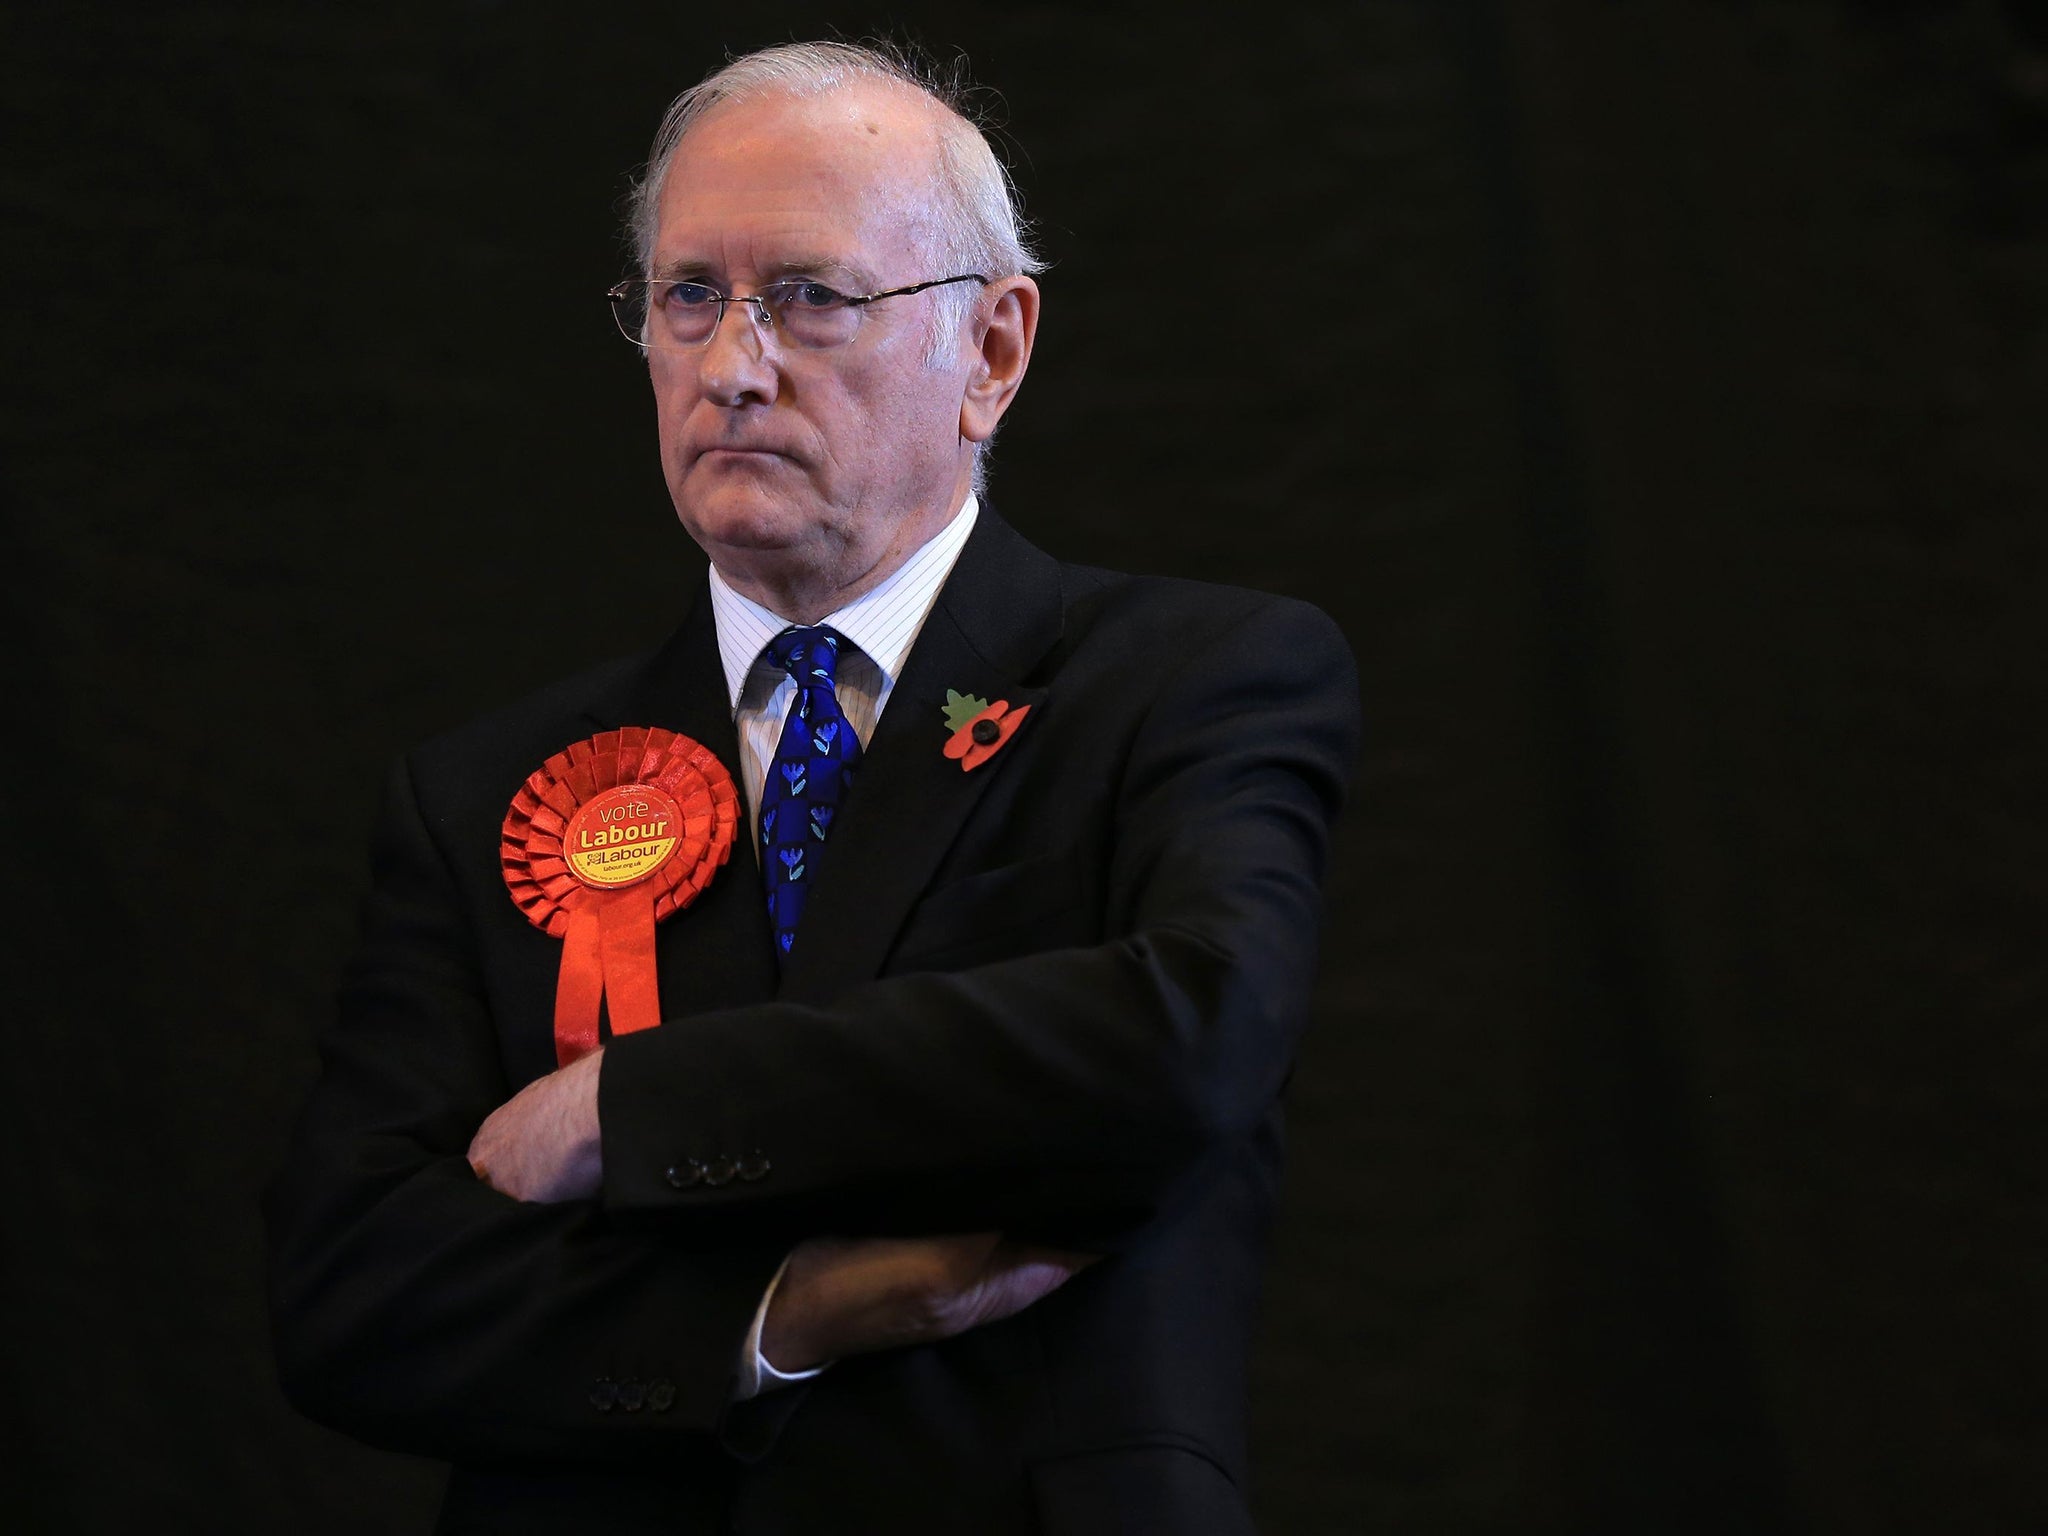 Labour Party candidate Alan Billings after winning the South Yorkshire Police and Crime Commissioner election